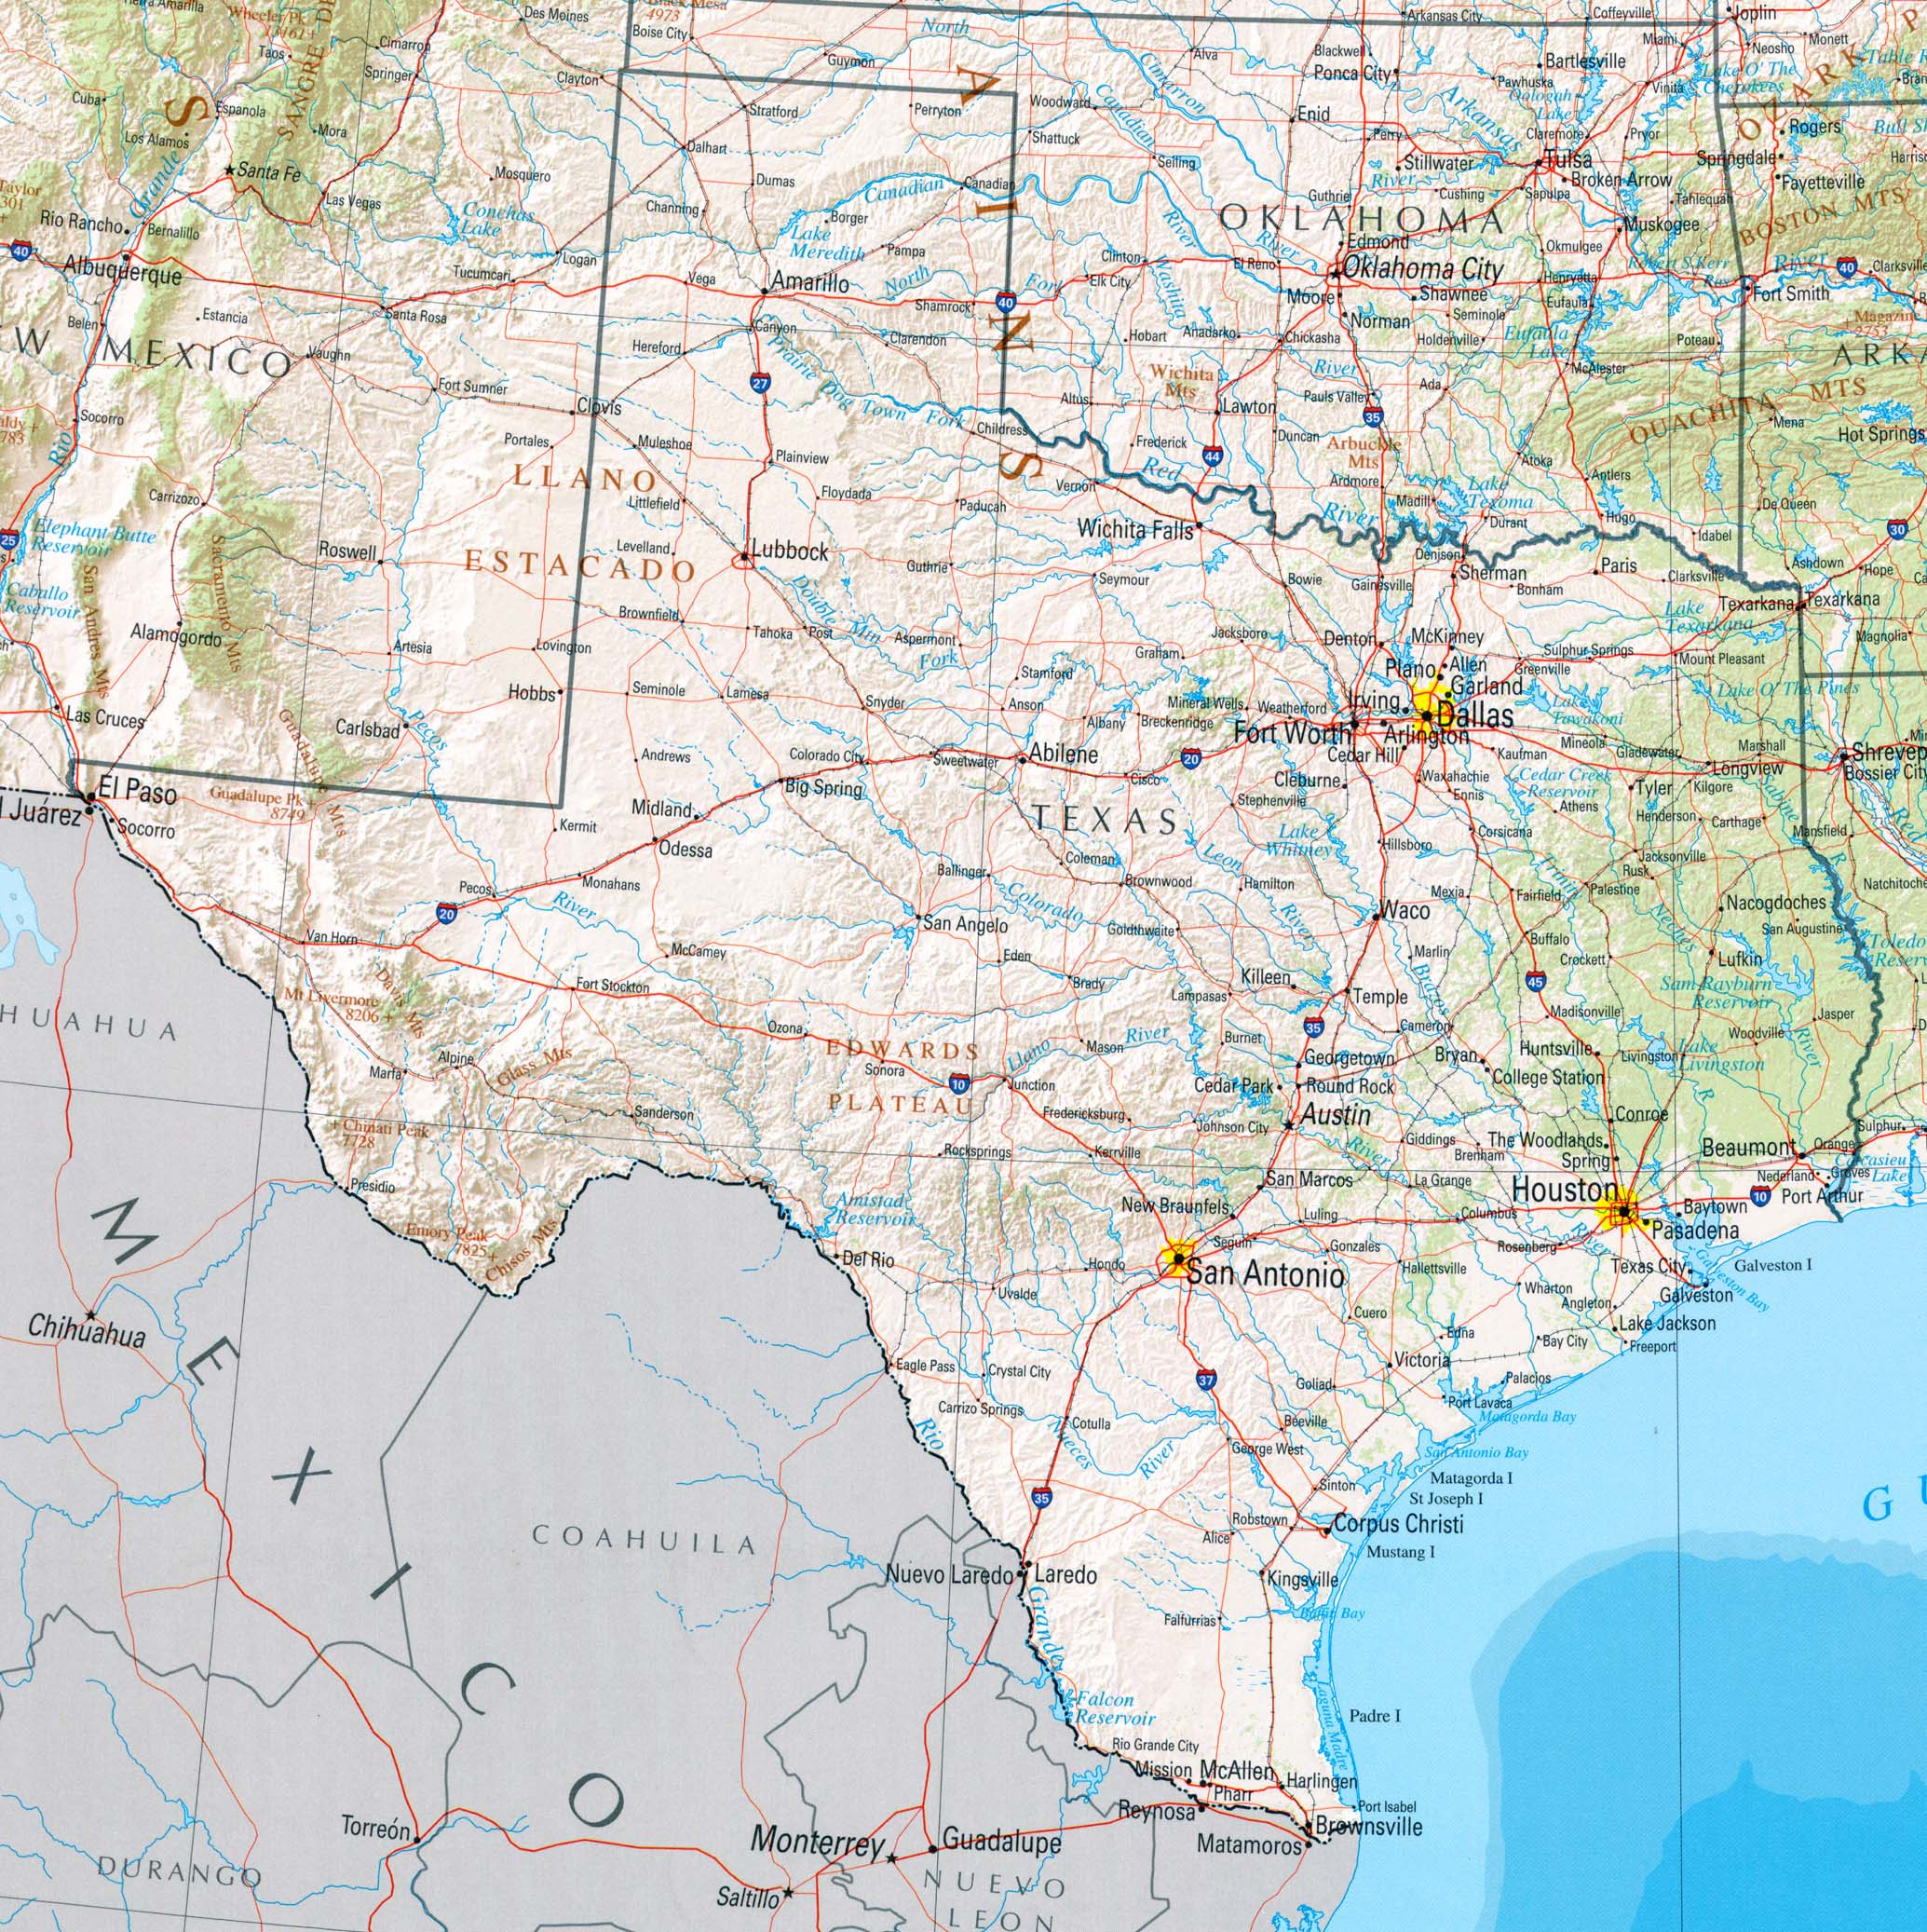 Texas Maps - Perry-Castañeda Map Collection - Ut Library Online - Map Of Texas Coastline Cities